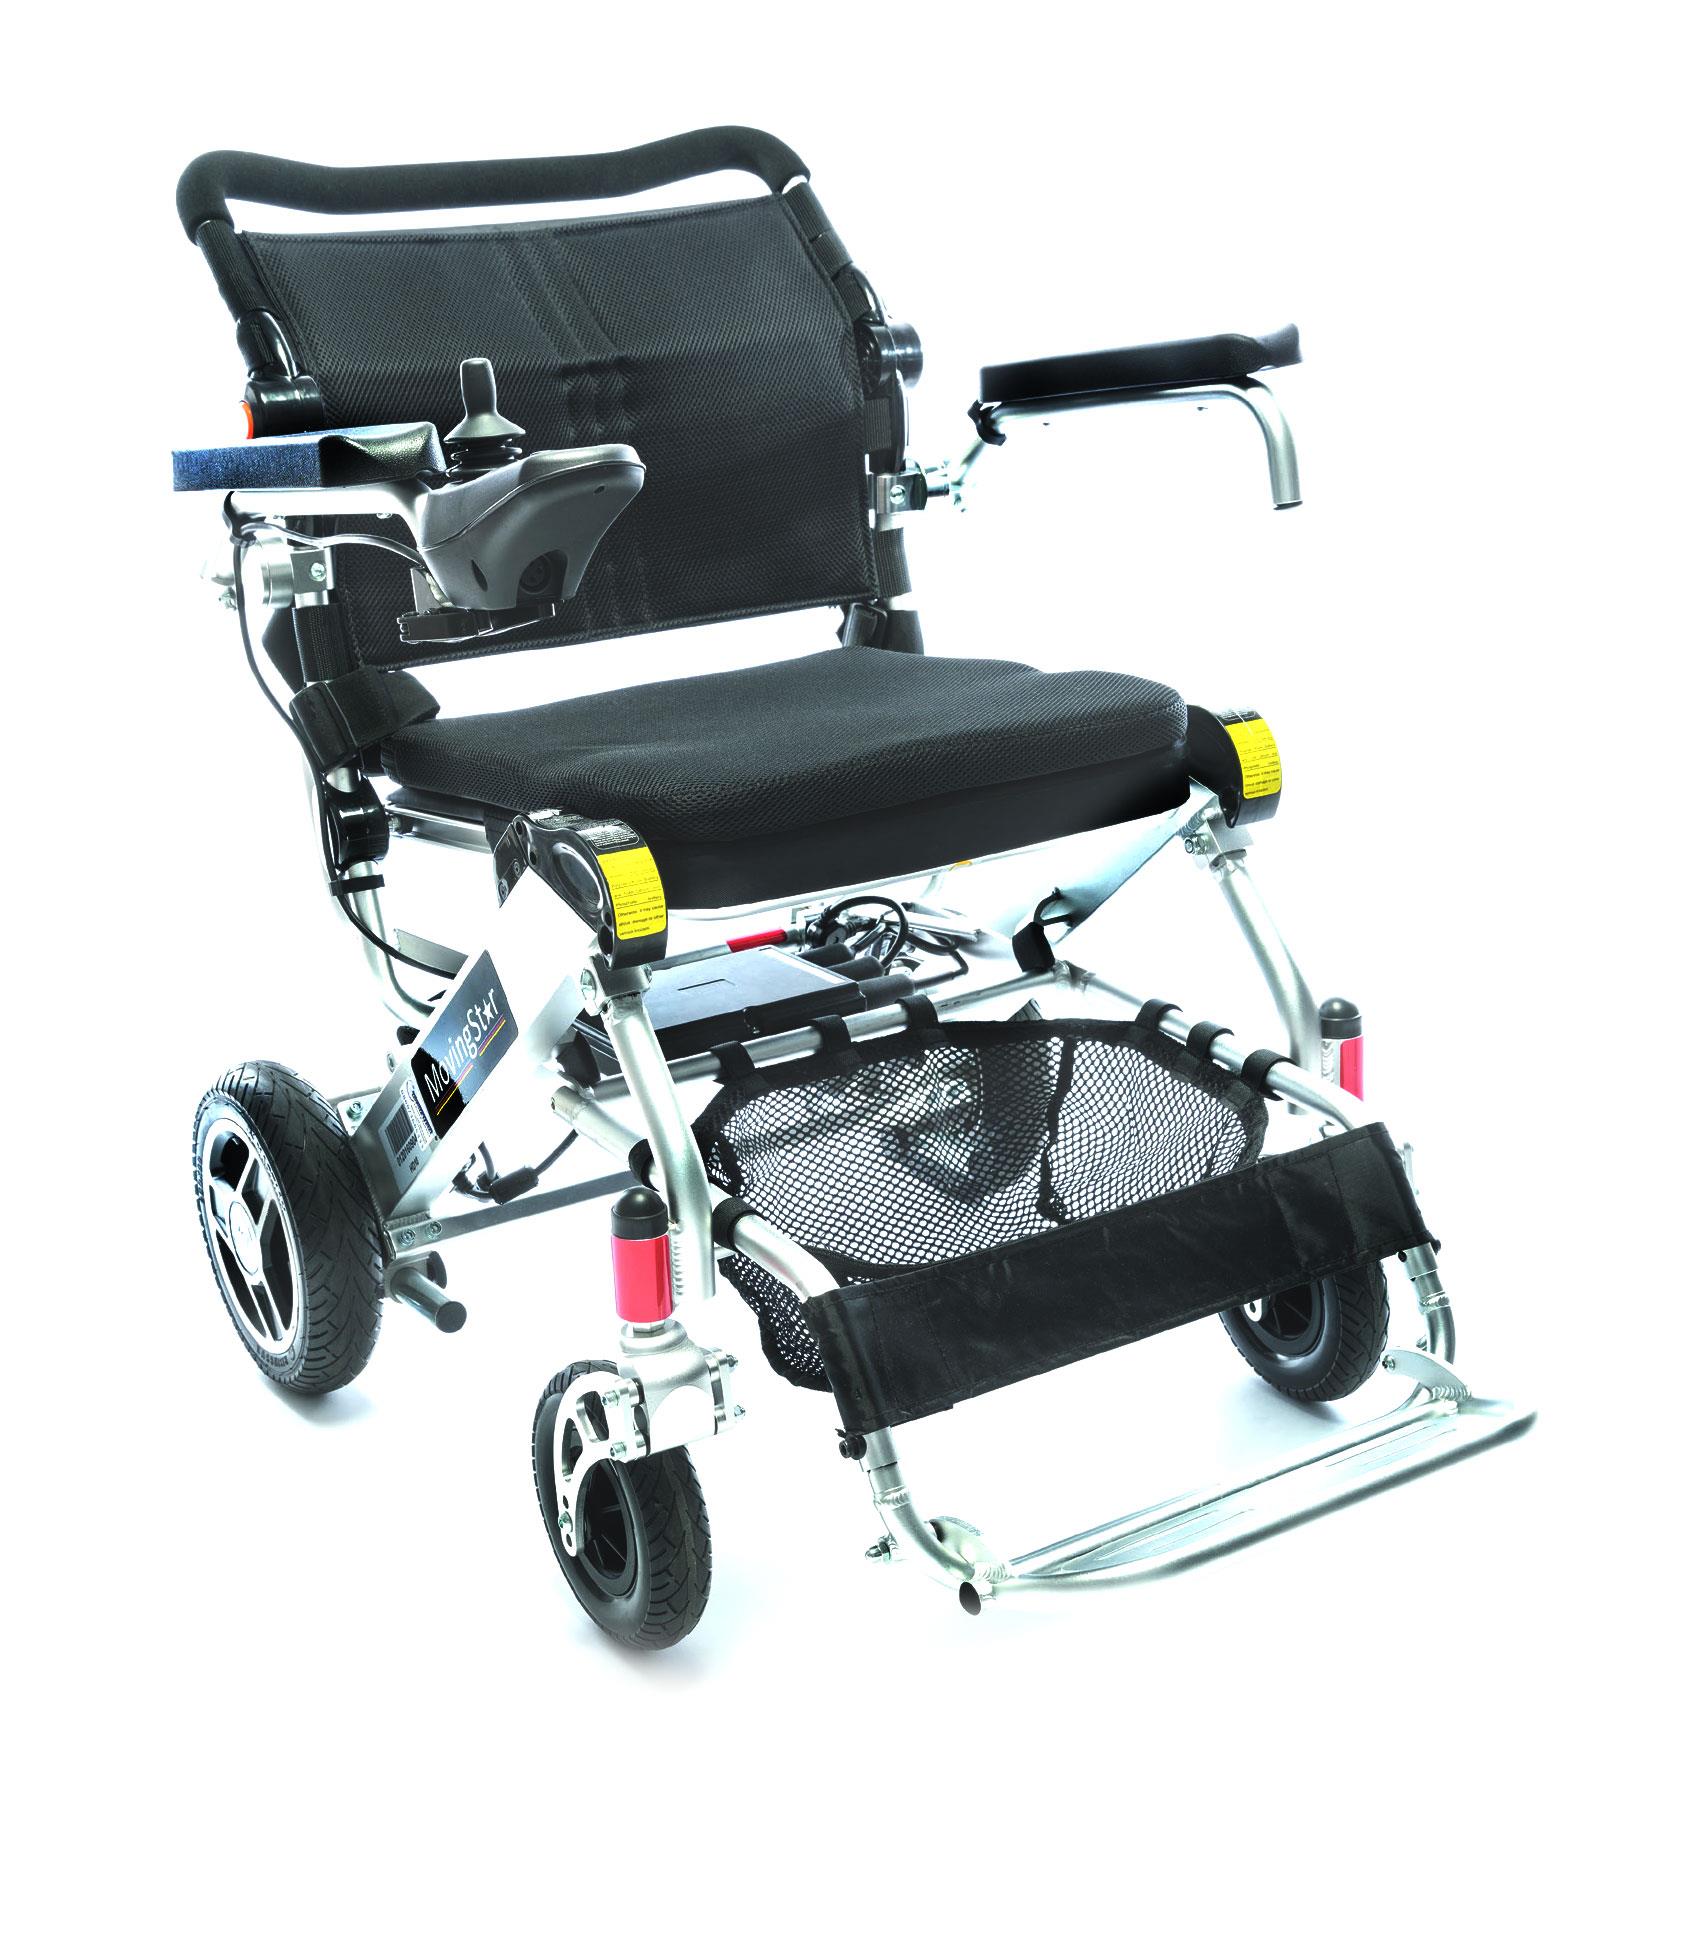 MOVINGSTAR 401 foldable power wheelchair - exhibition vehicle